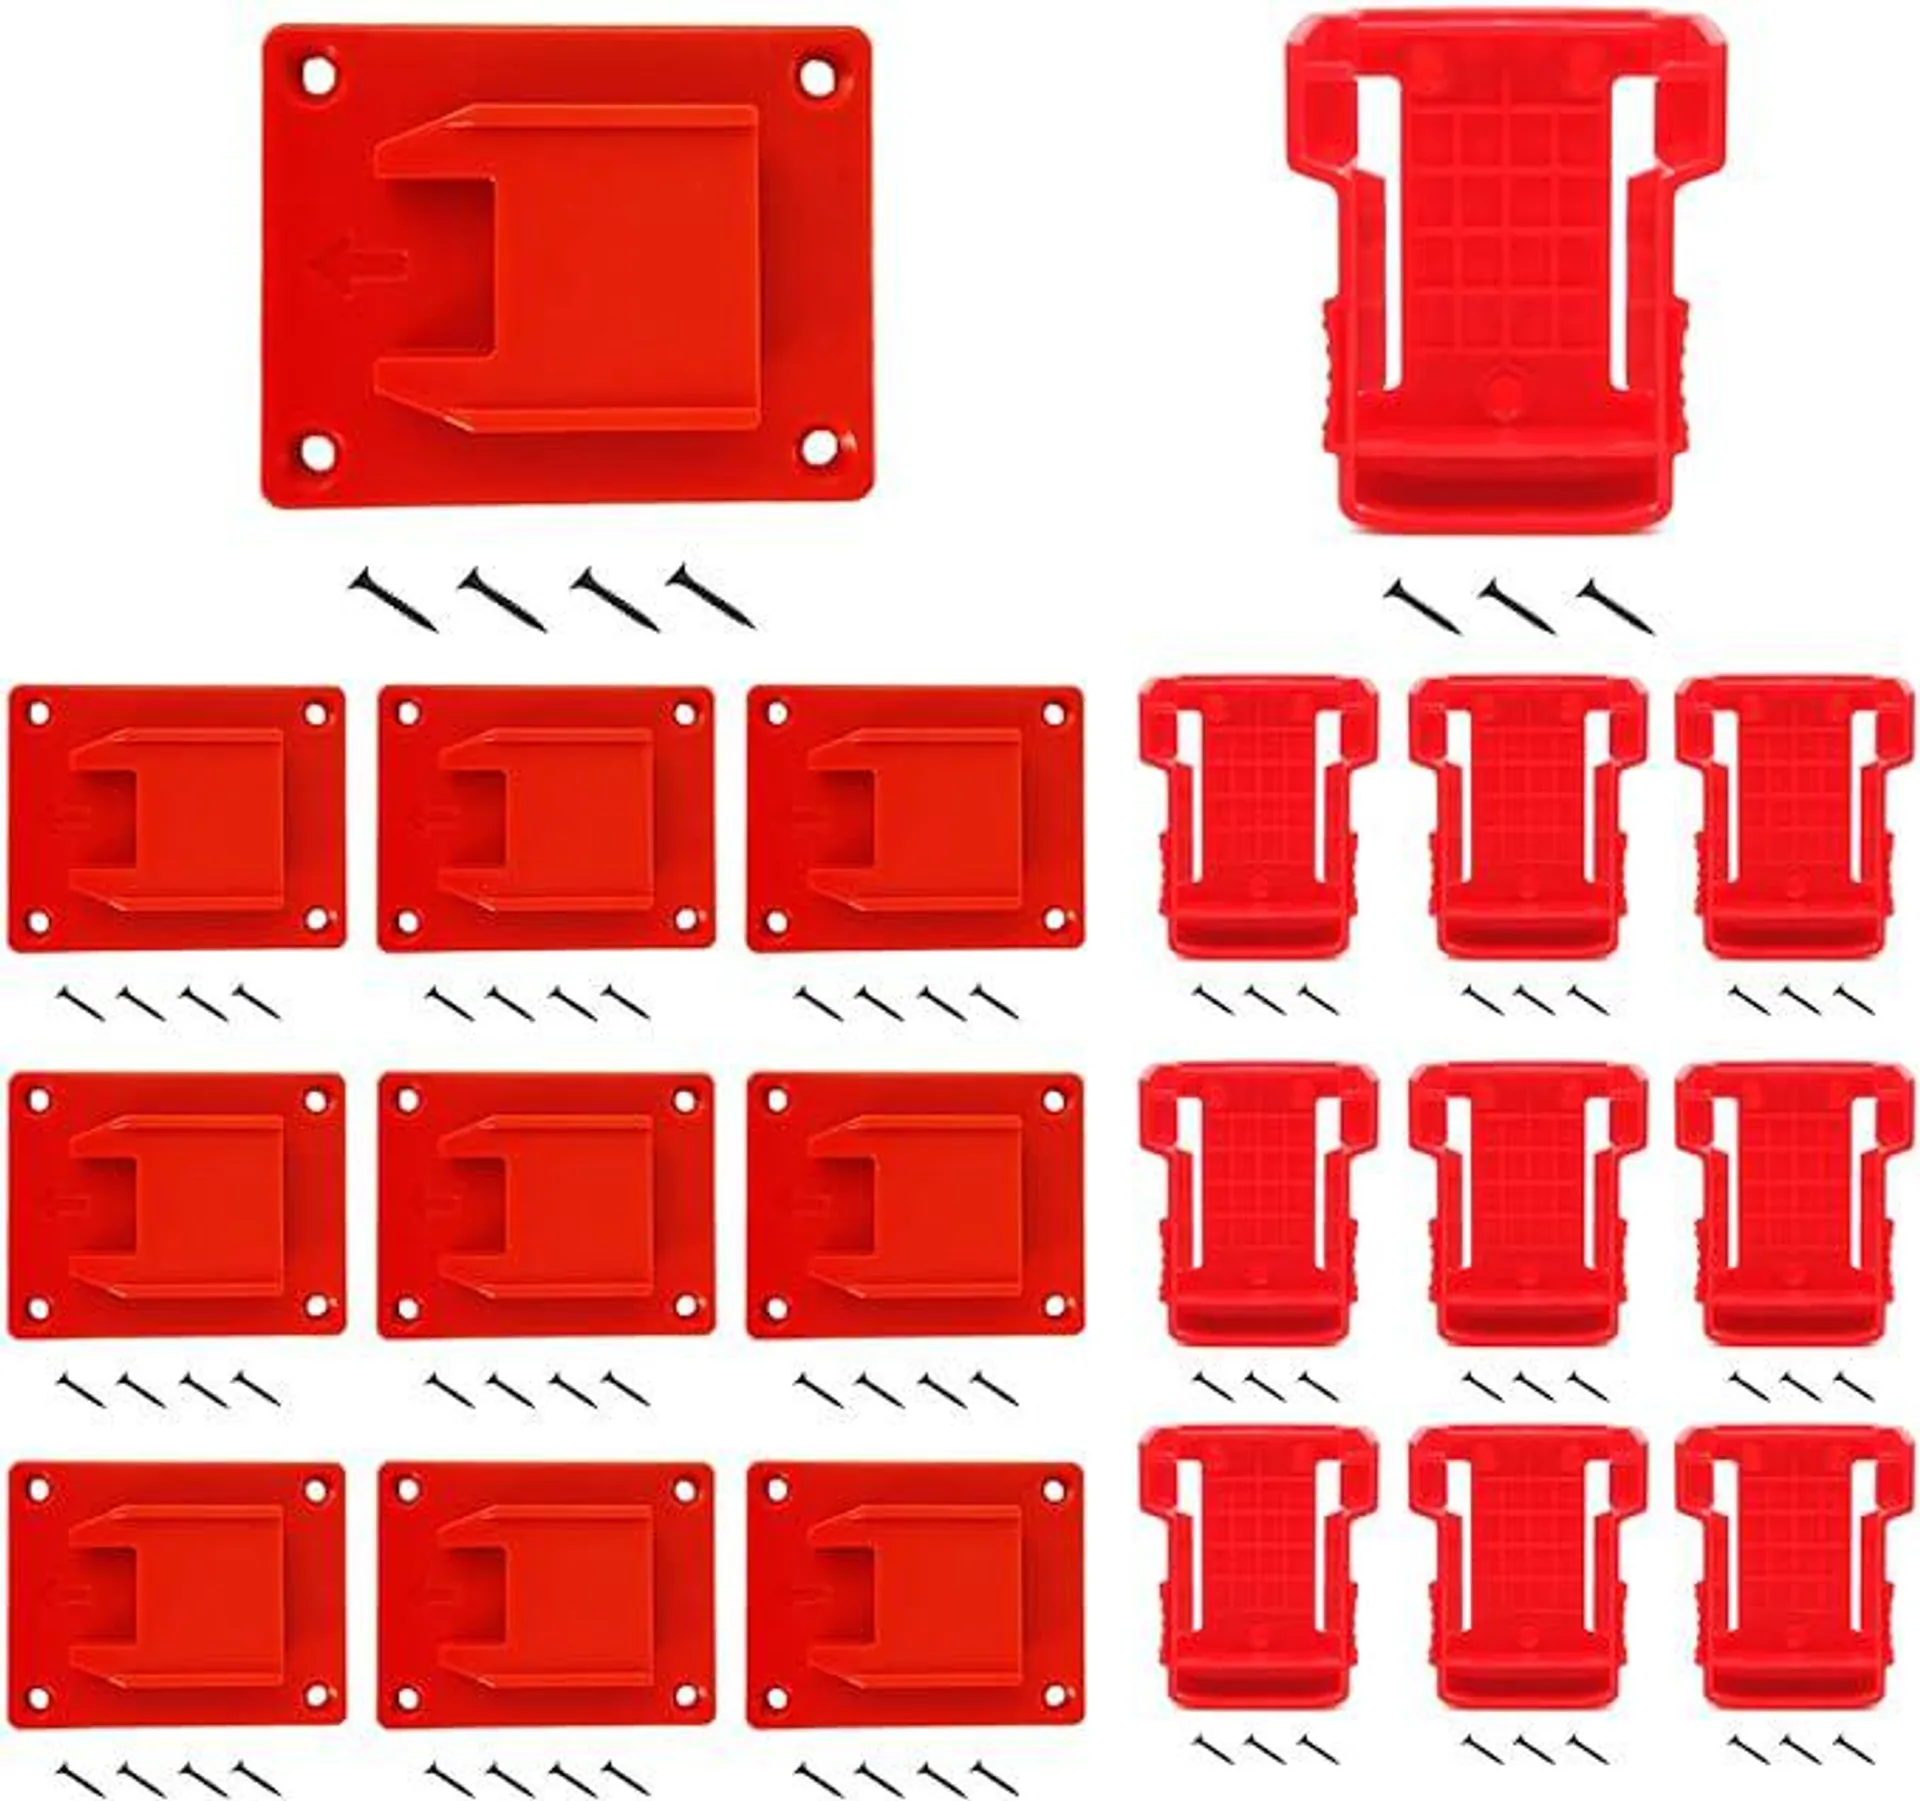 Tool Holders Battery Holders Mount for Milwaukee M18 18V Battery Drill Tool Red 10pcs tool holders and 10pcs battery holders with screws